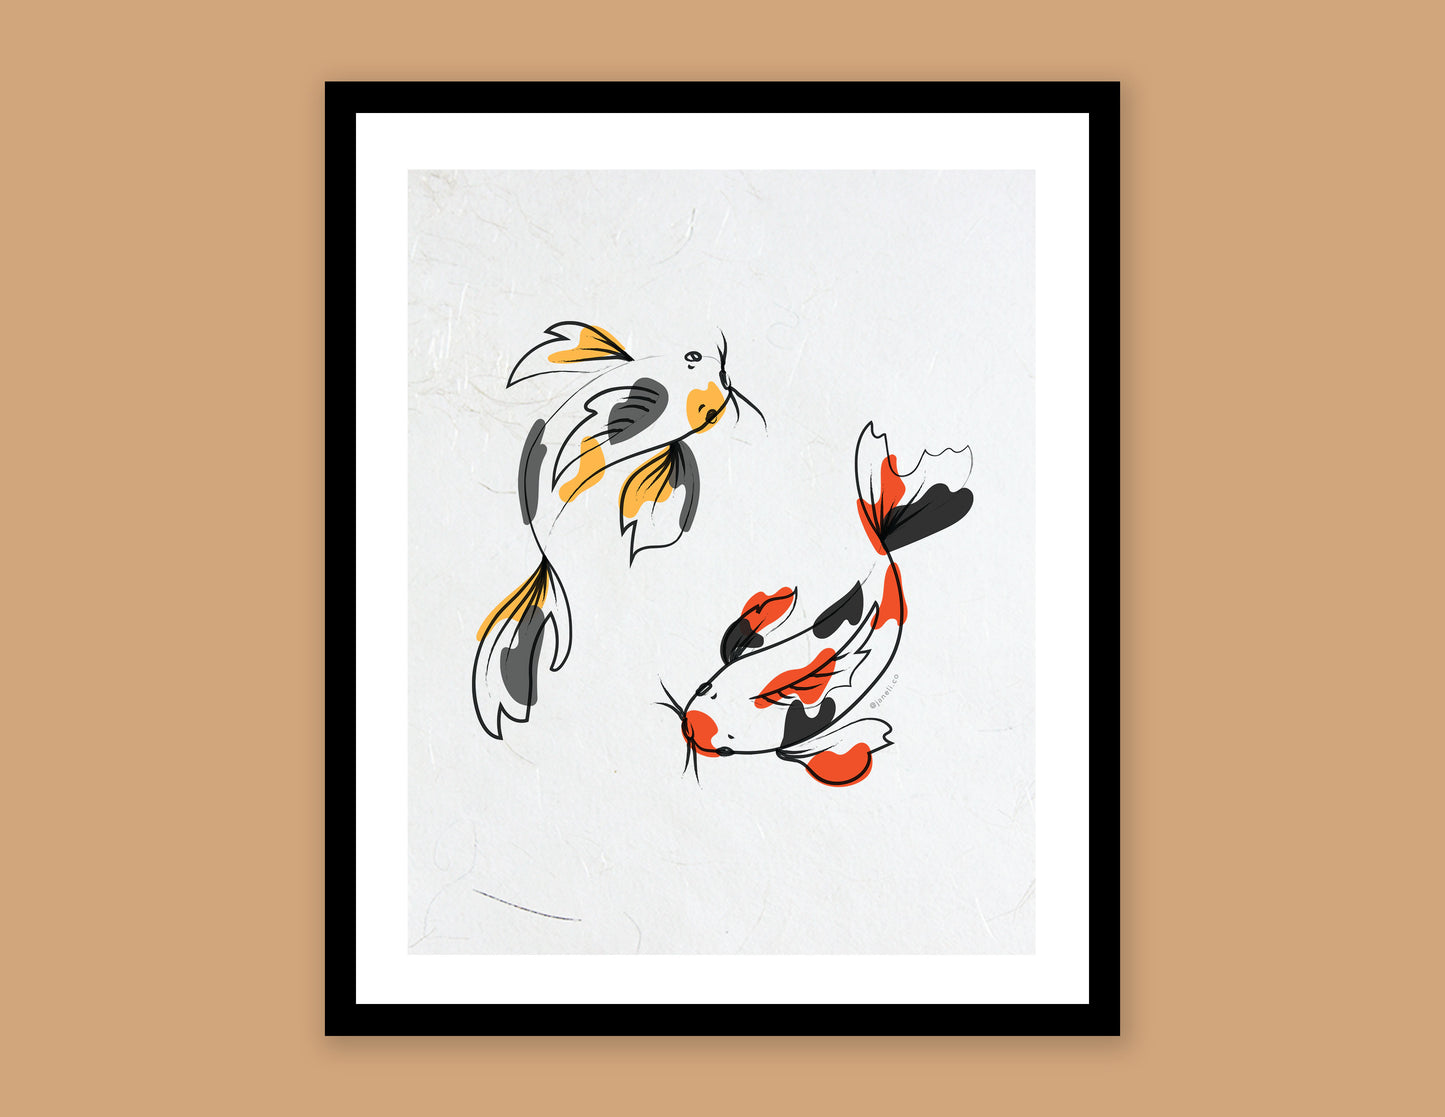 A digital mock of a framed JaneLi.Co print of 2 circling koi over a tan background.